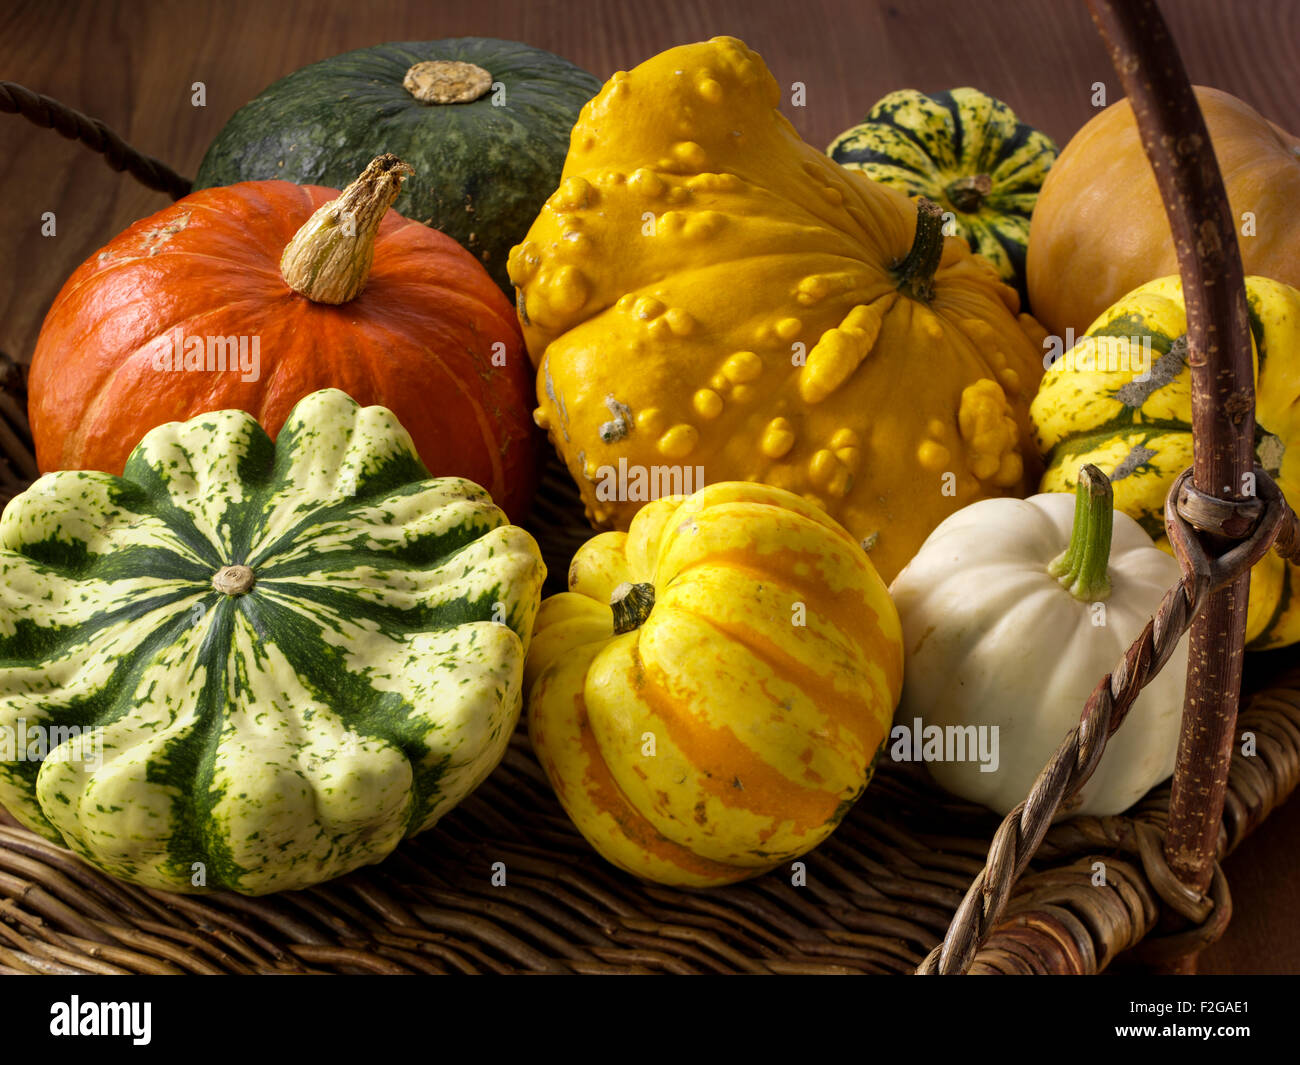 Winter squashes and pumpkins Stock Photo